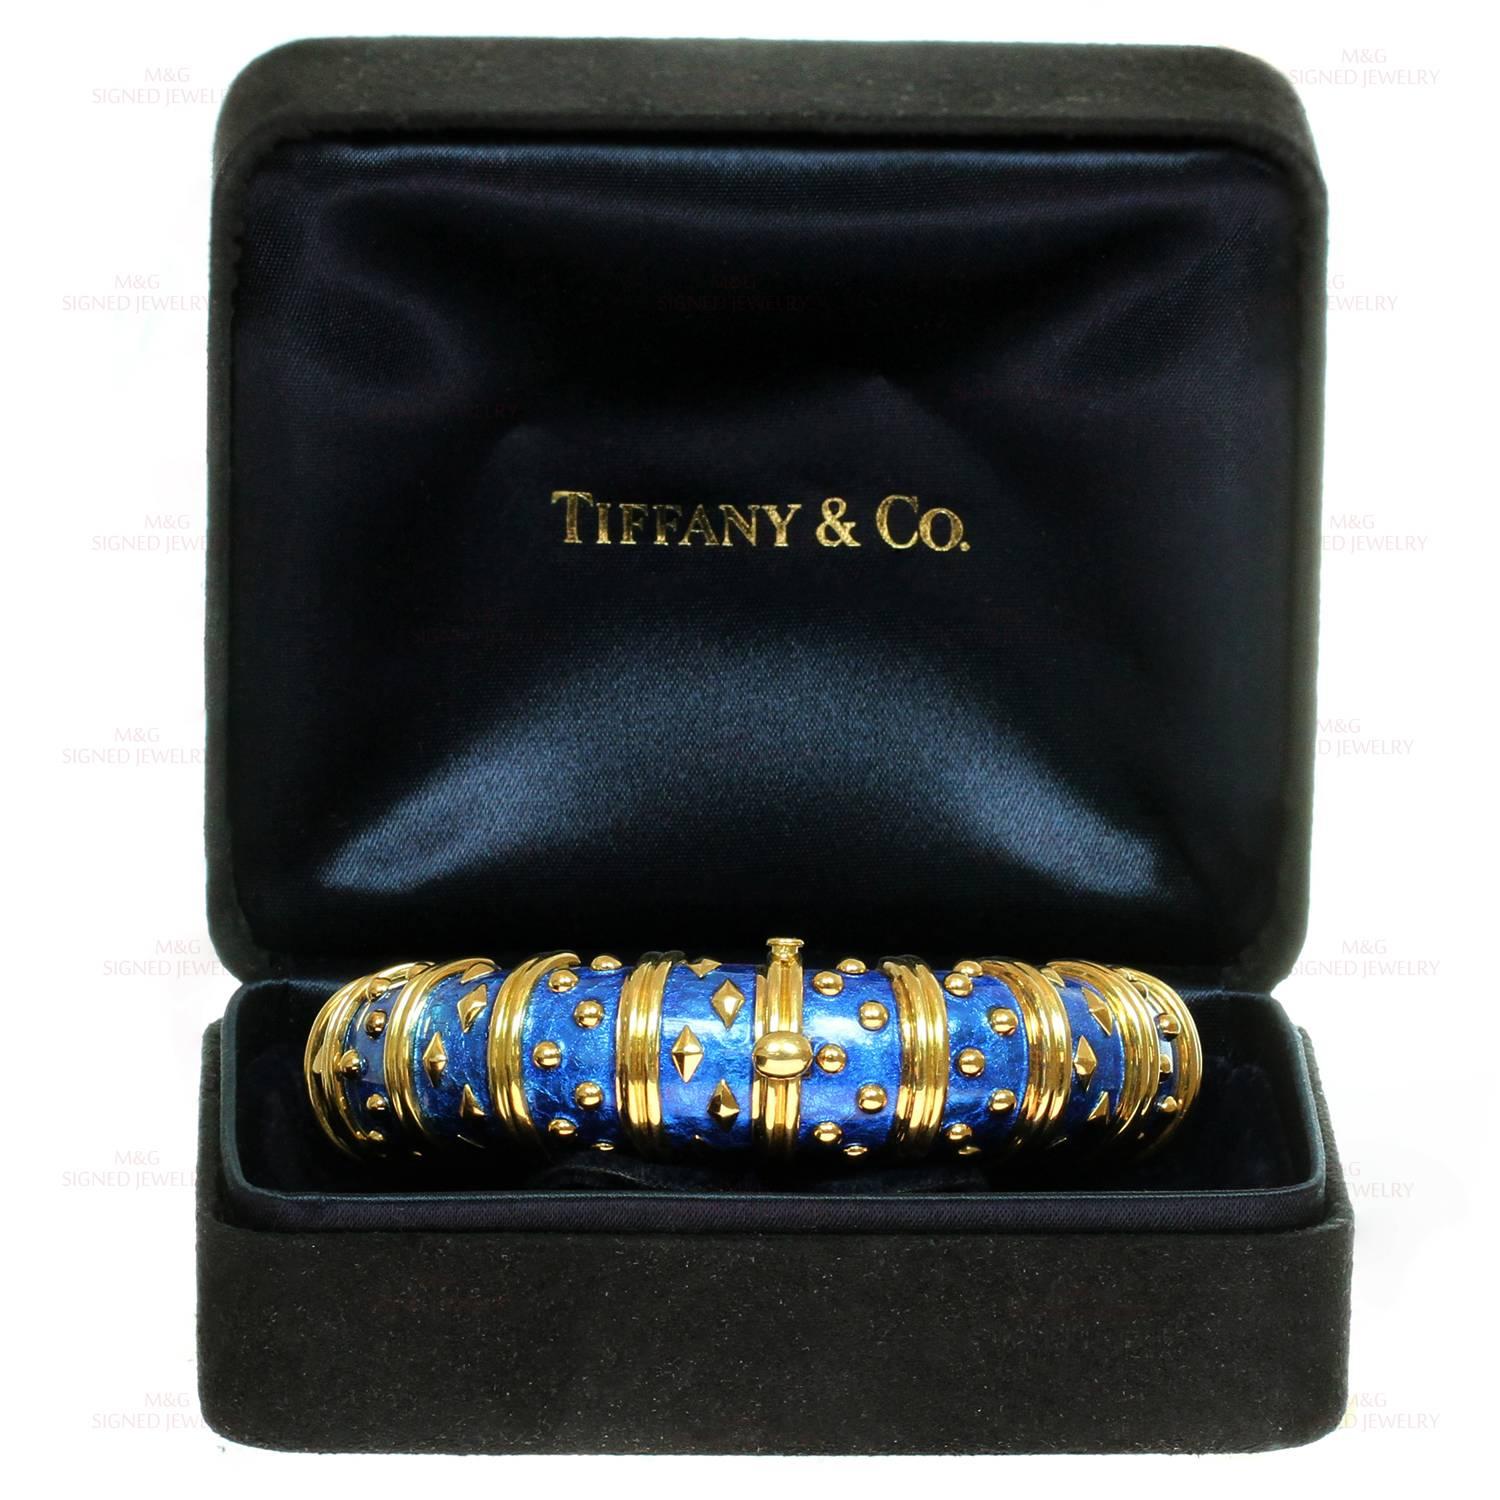 This iconic Tiffany bracelet was designed by Schlumberger for the dazzling Dot Losange collection. The bangle is crafted in 18k yellow gold and beautifully inlaid with blue enamel. Made in United States circa 2000s. Measurements: 0.70" (18mm)